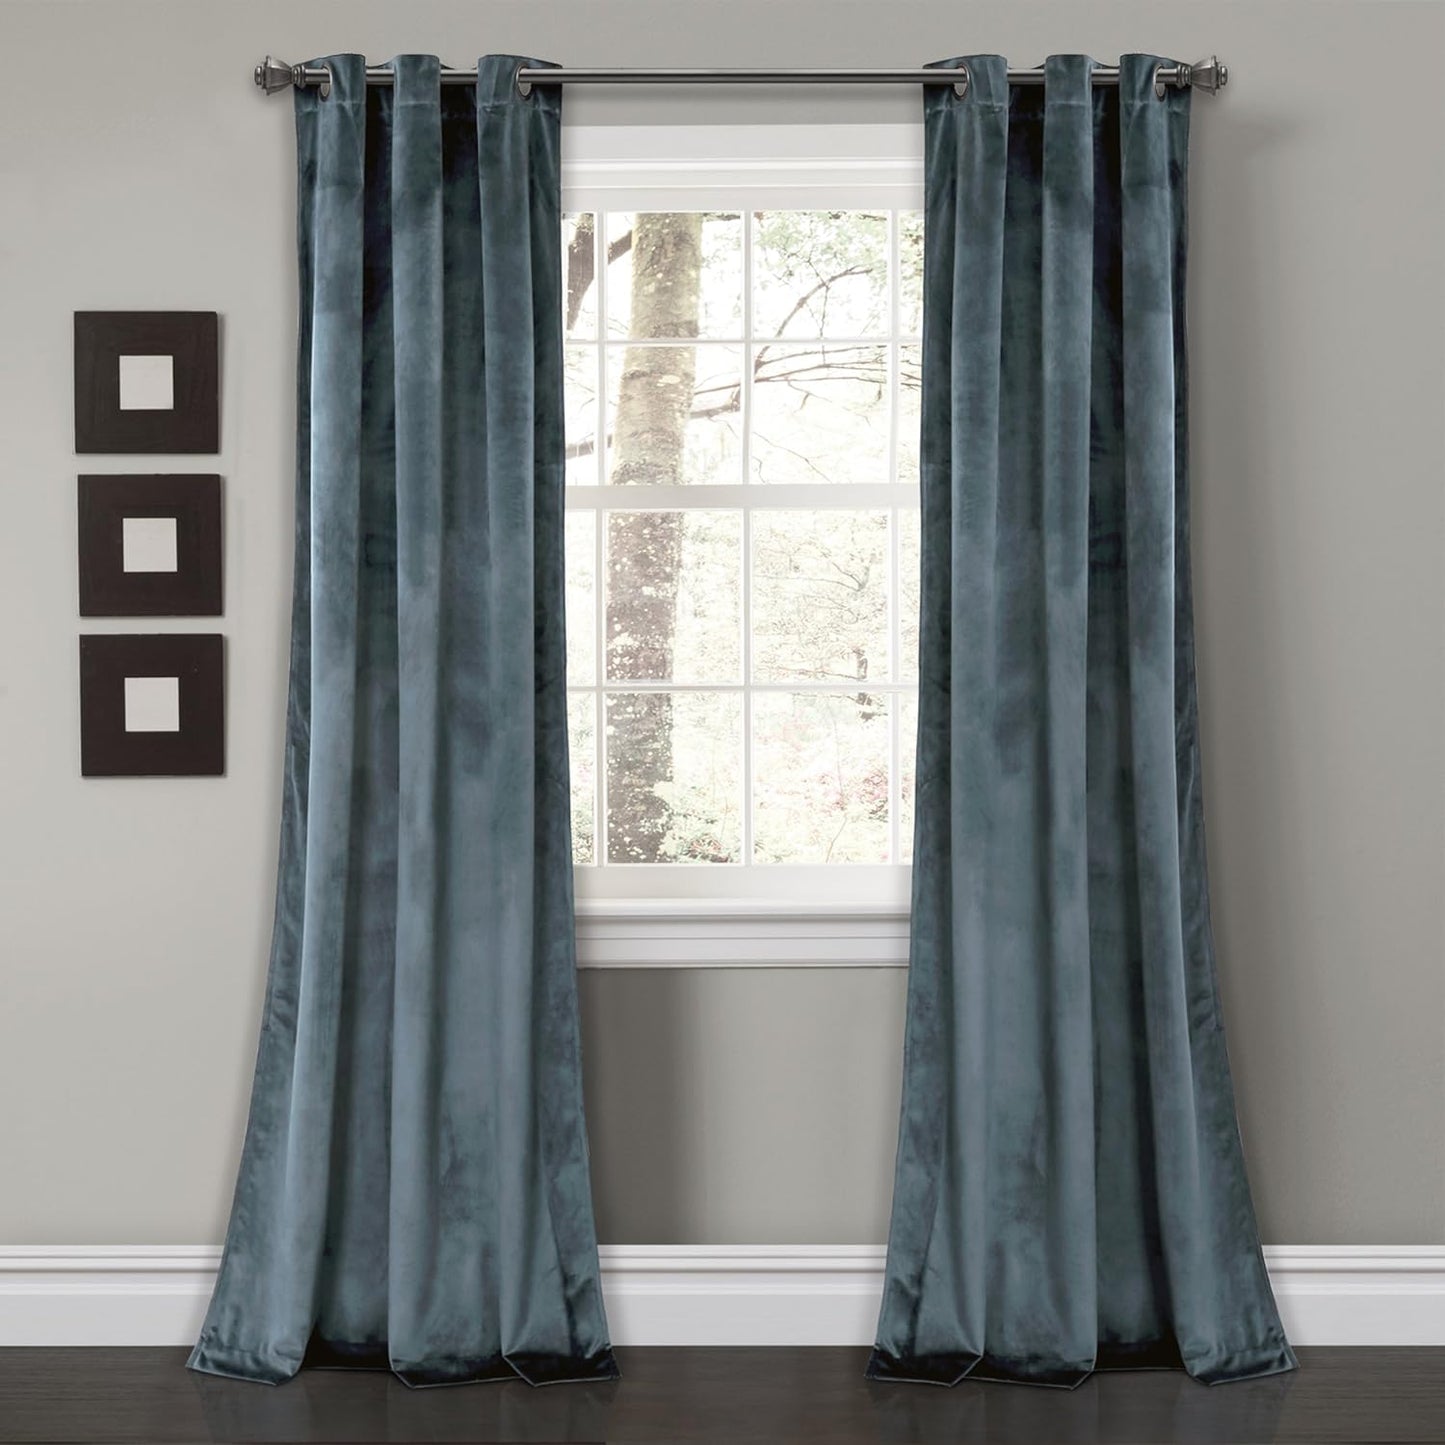 Lush Decor Prima Velvet Curtains Color Block Light Filtering Window Panel Set for Living, Dining, Bedroom (Pair), 38" W X 84" L, Navy  Triangle Home Fashions Blue Room Darkening 38"W X 84"L